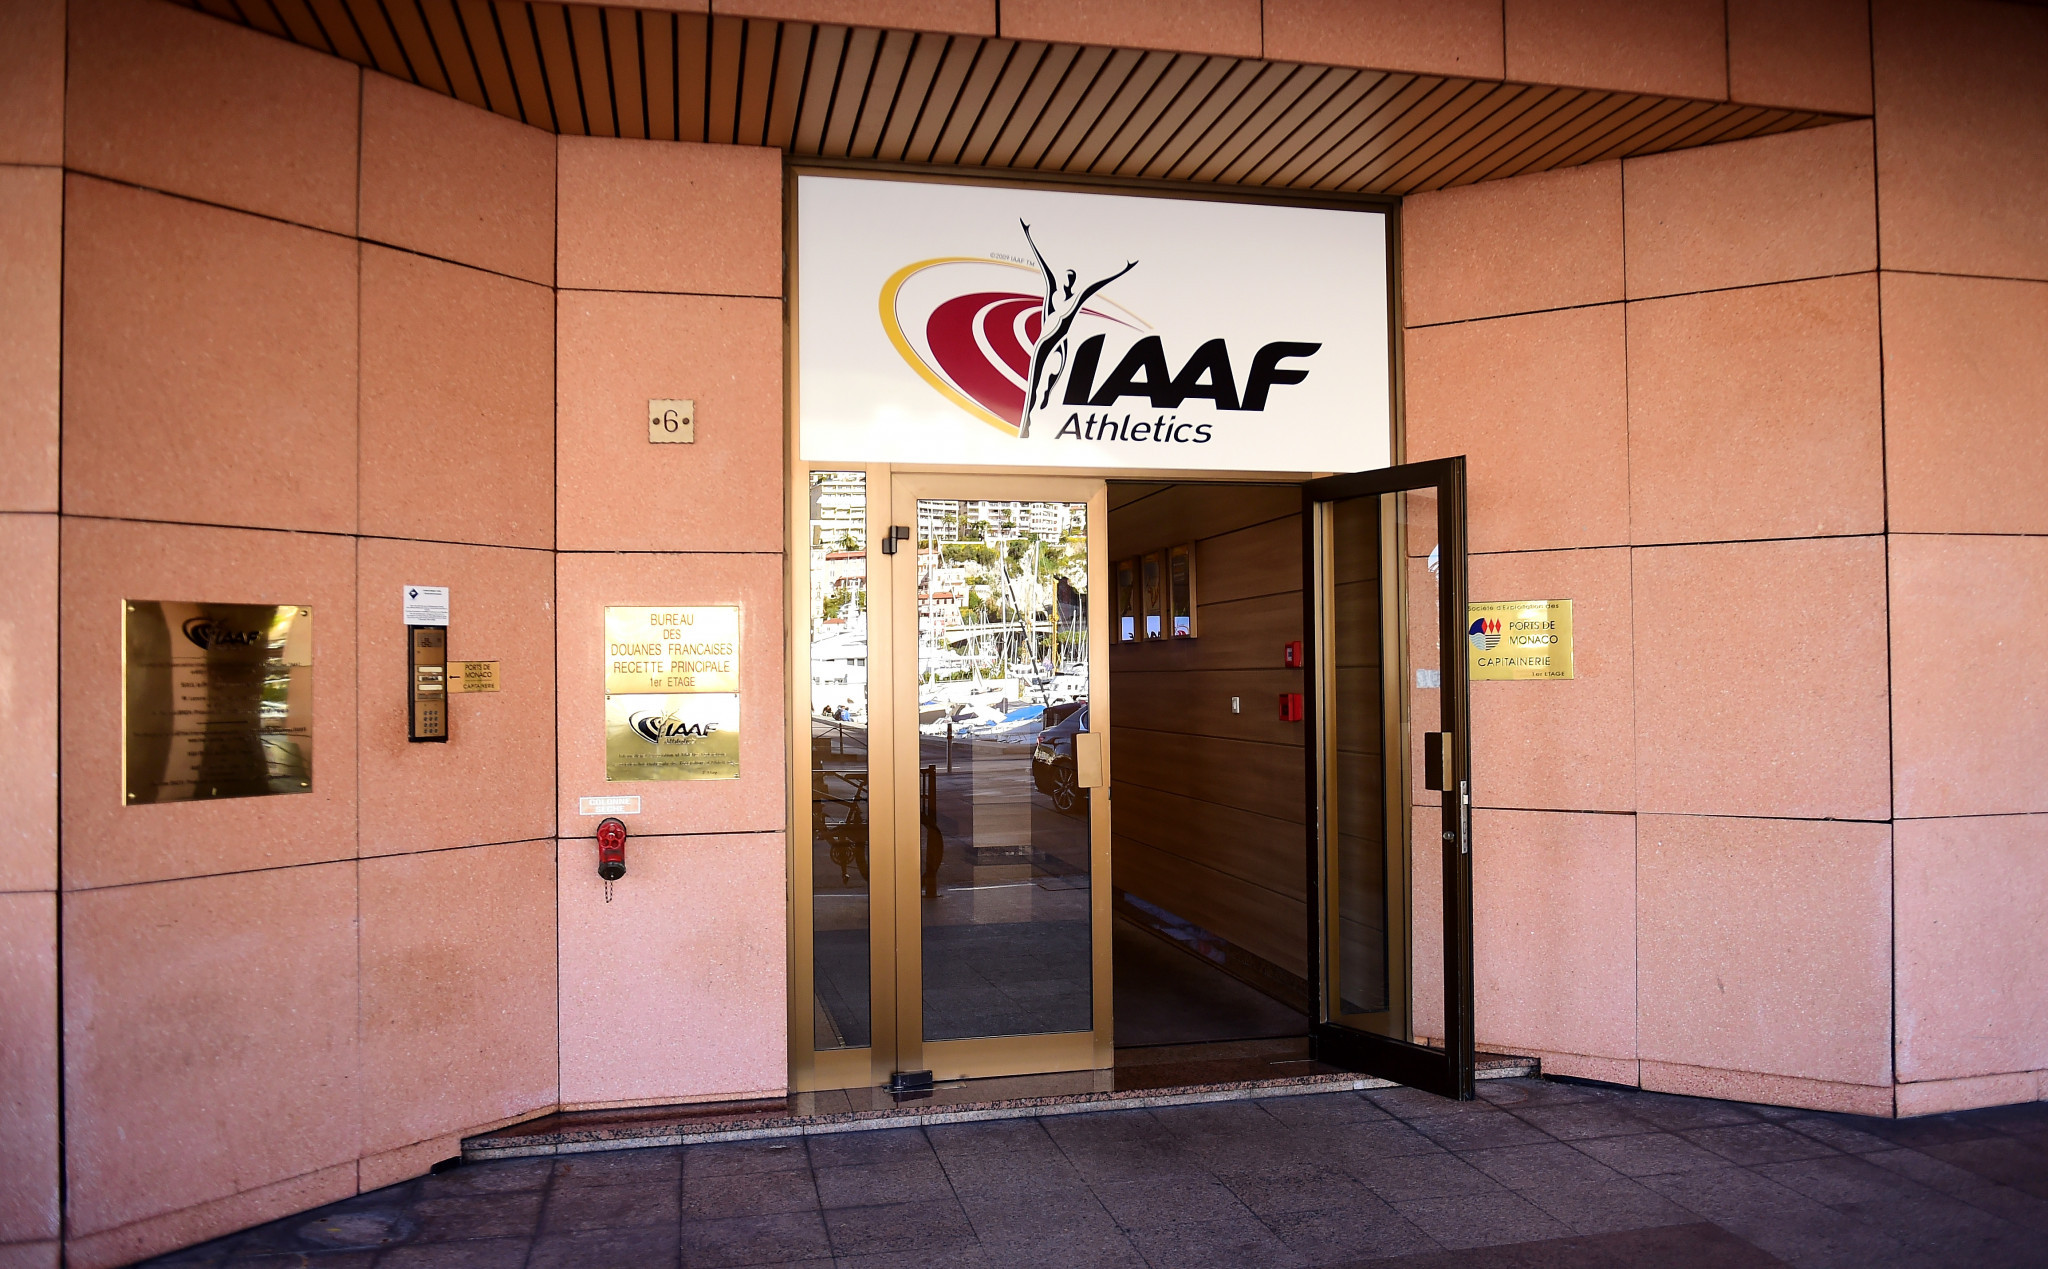 Pavel Kolobkov and Sebastian Coe are rumoured to be meeting at the IAAF headquarters in Monaco ©Getty Images